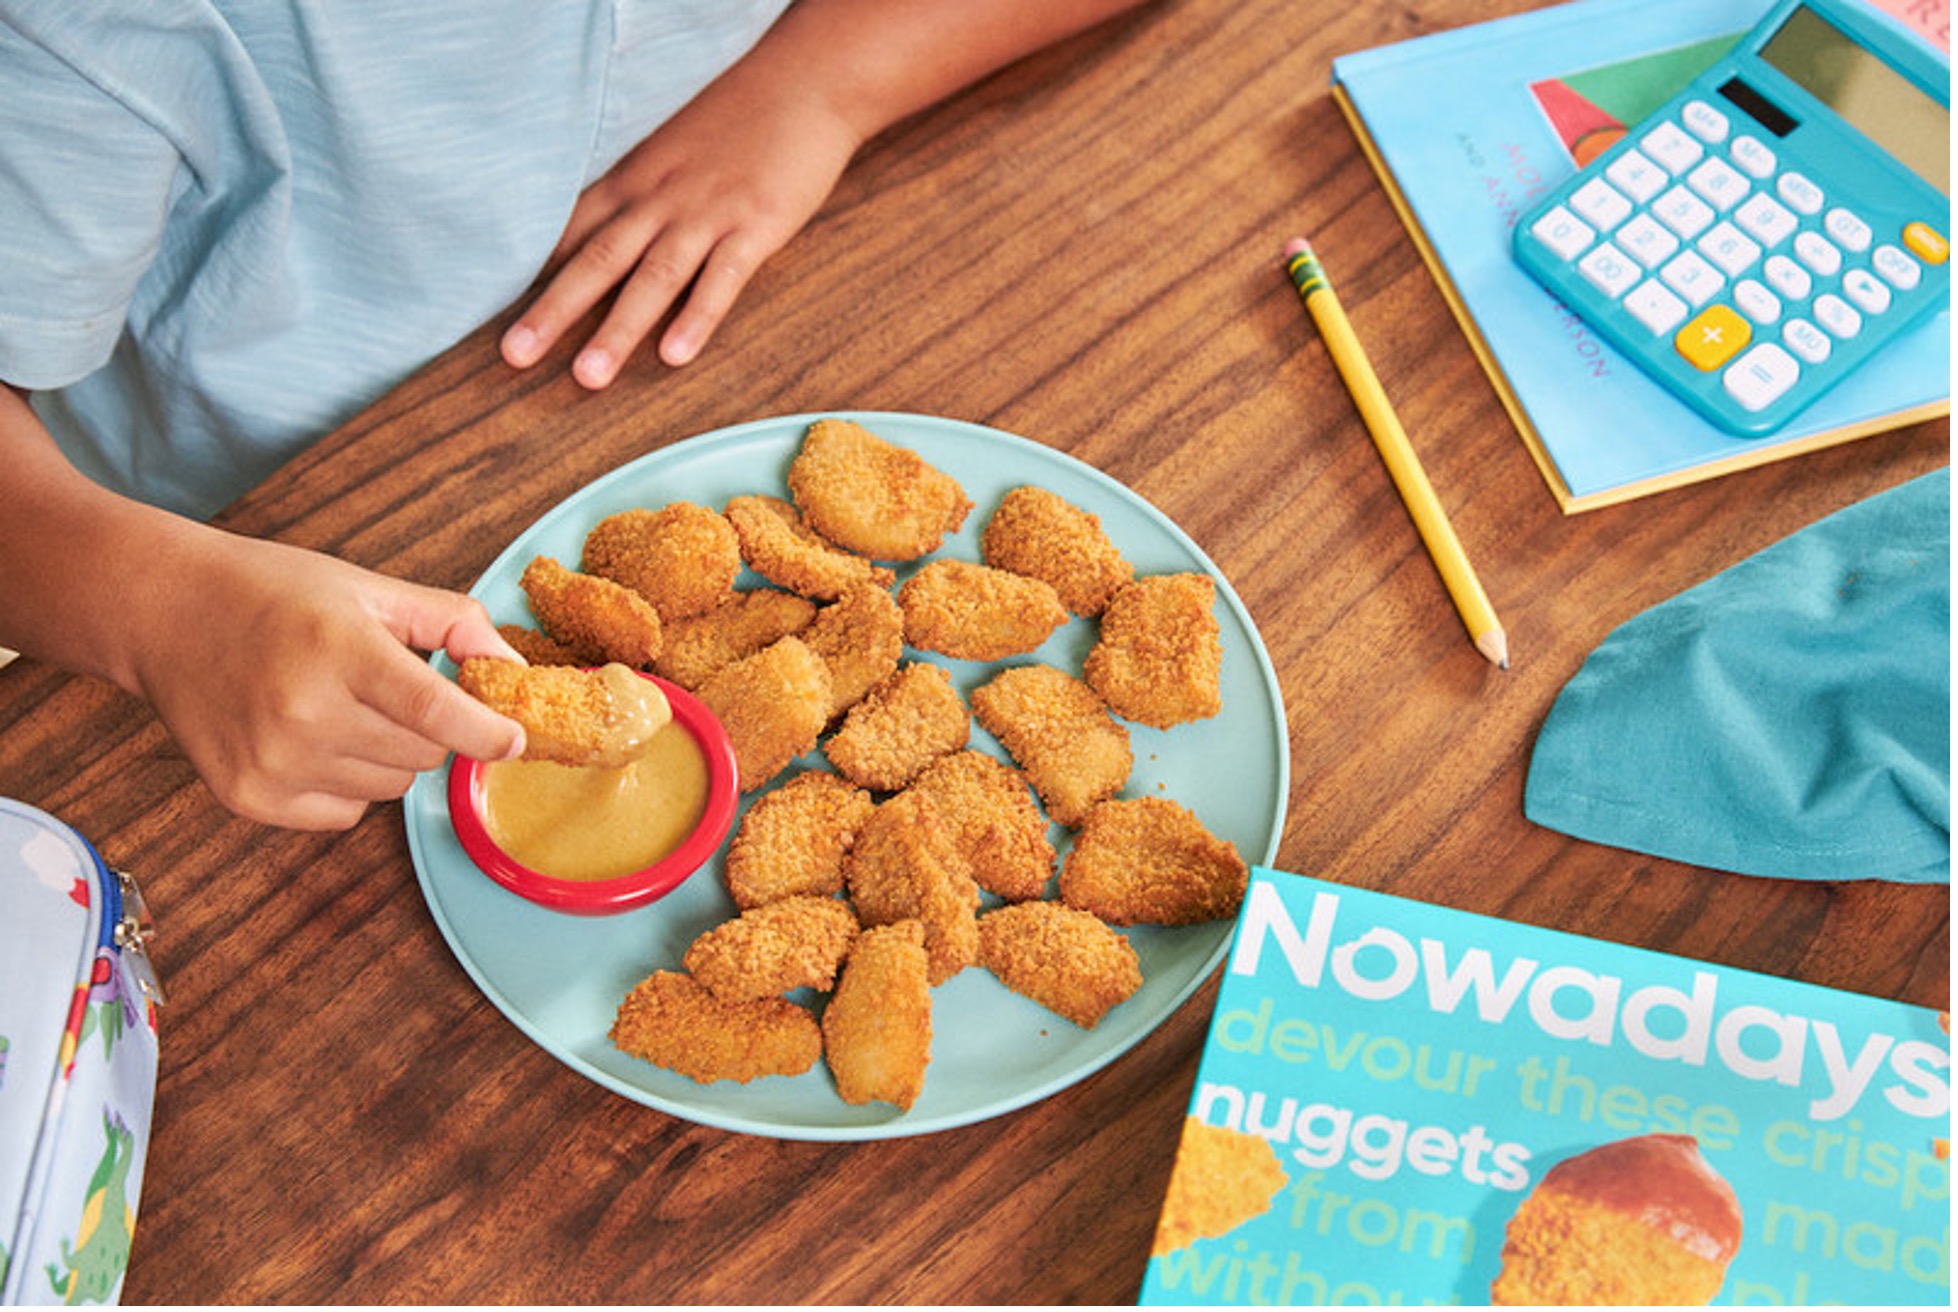 Nowadays Nuggets